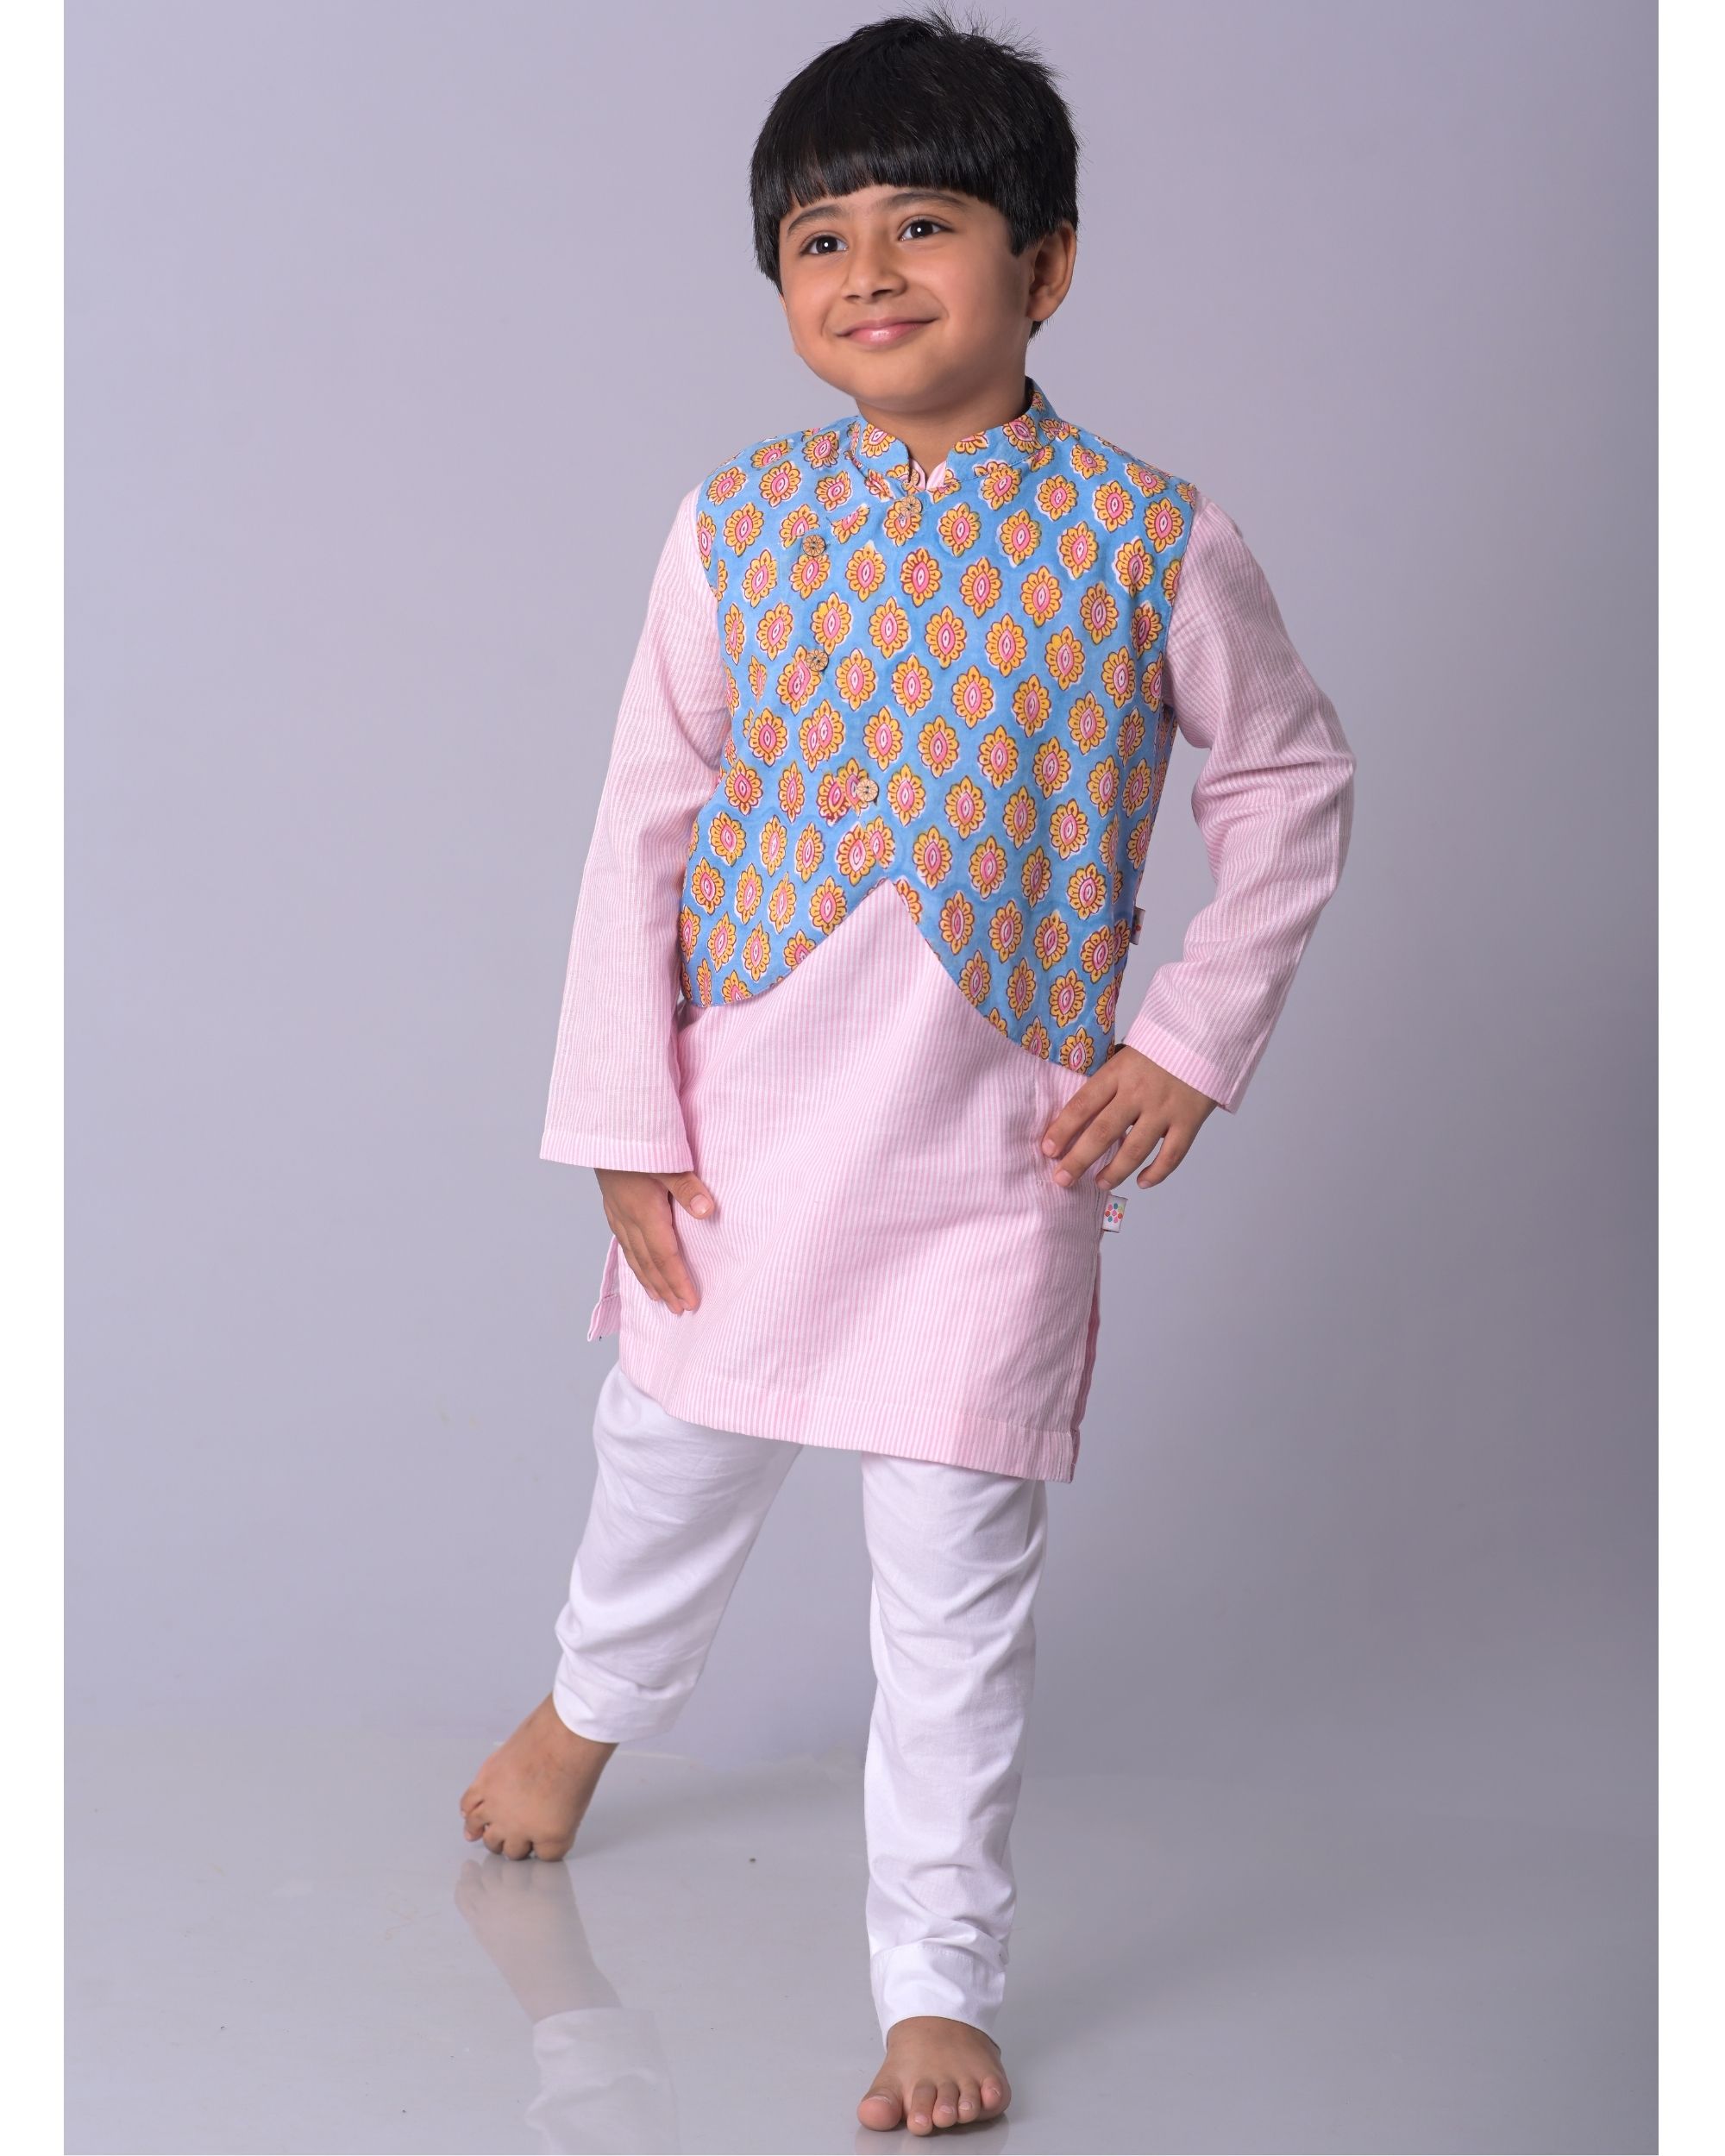 Pink striped kurta with white pants and blue hand block printed jacket - set of three